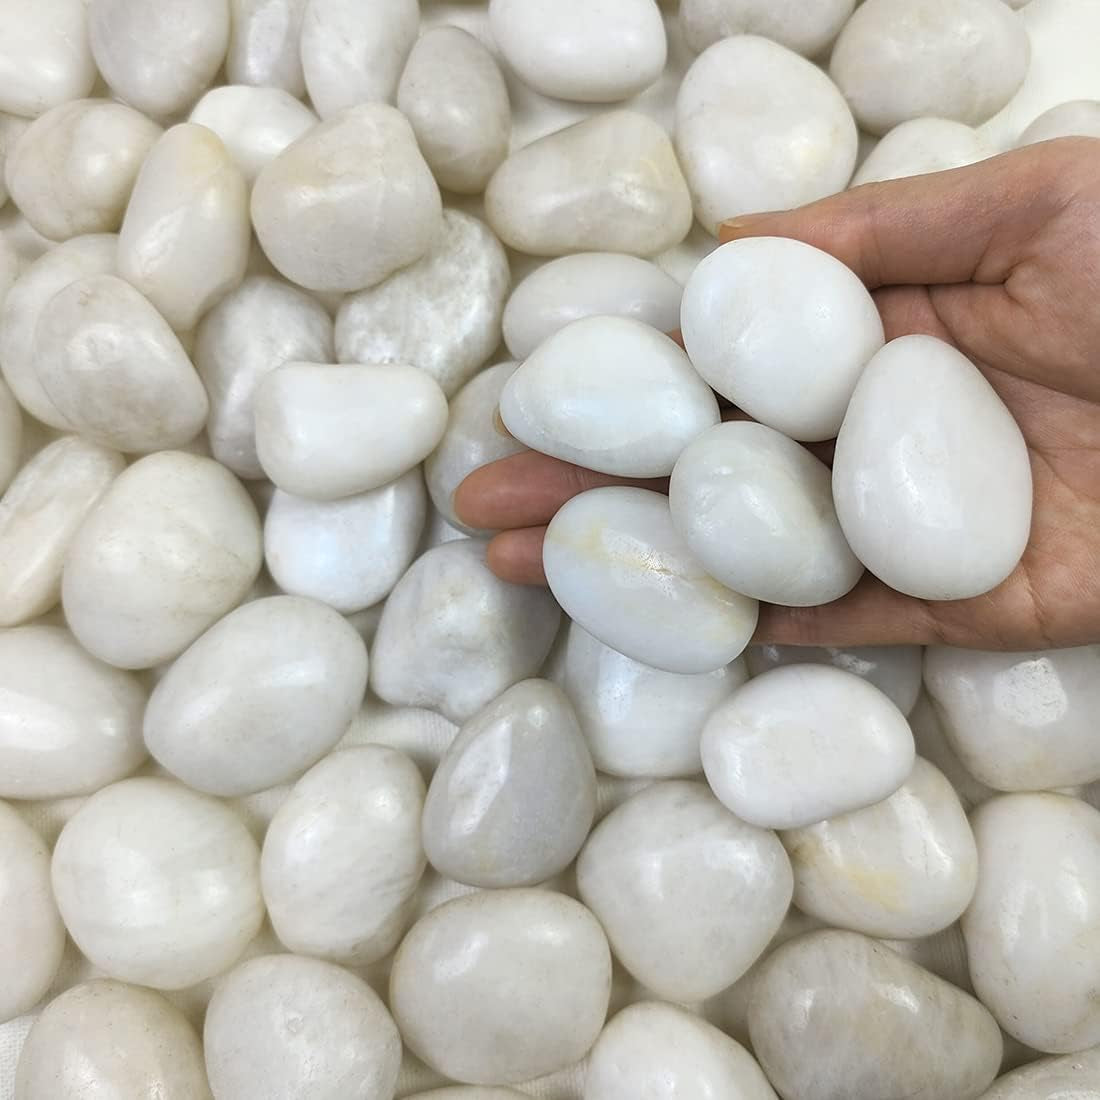 5Lbs White Pebbles for Indoor Plants, 0.8-1.2 Inch Smooth White River Rocks for Potted Plants, Decorative Polished Stones for Landscaping Vase Fish Tank and Outdoor Garden Pavers